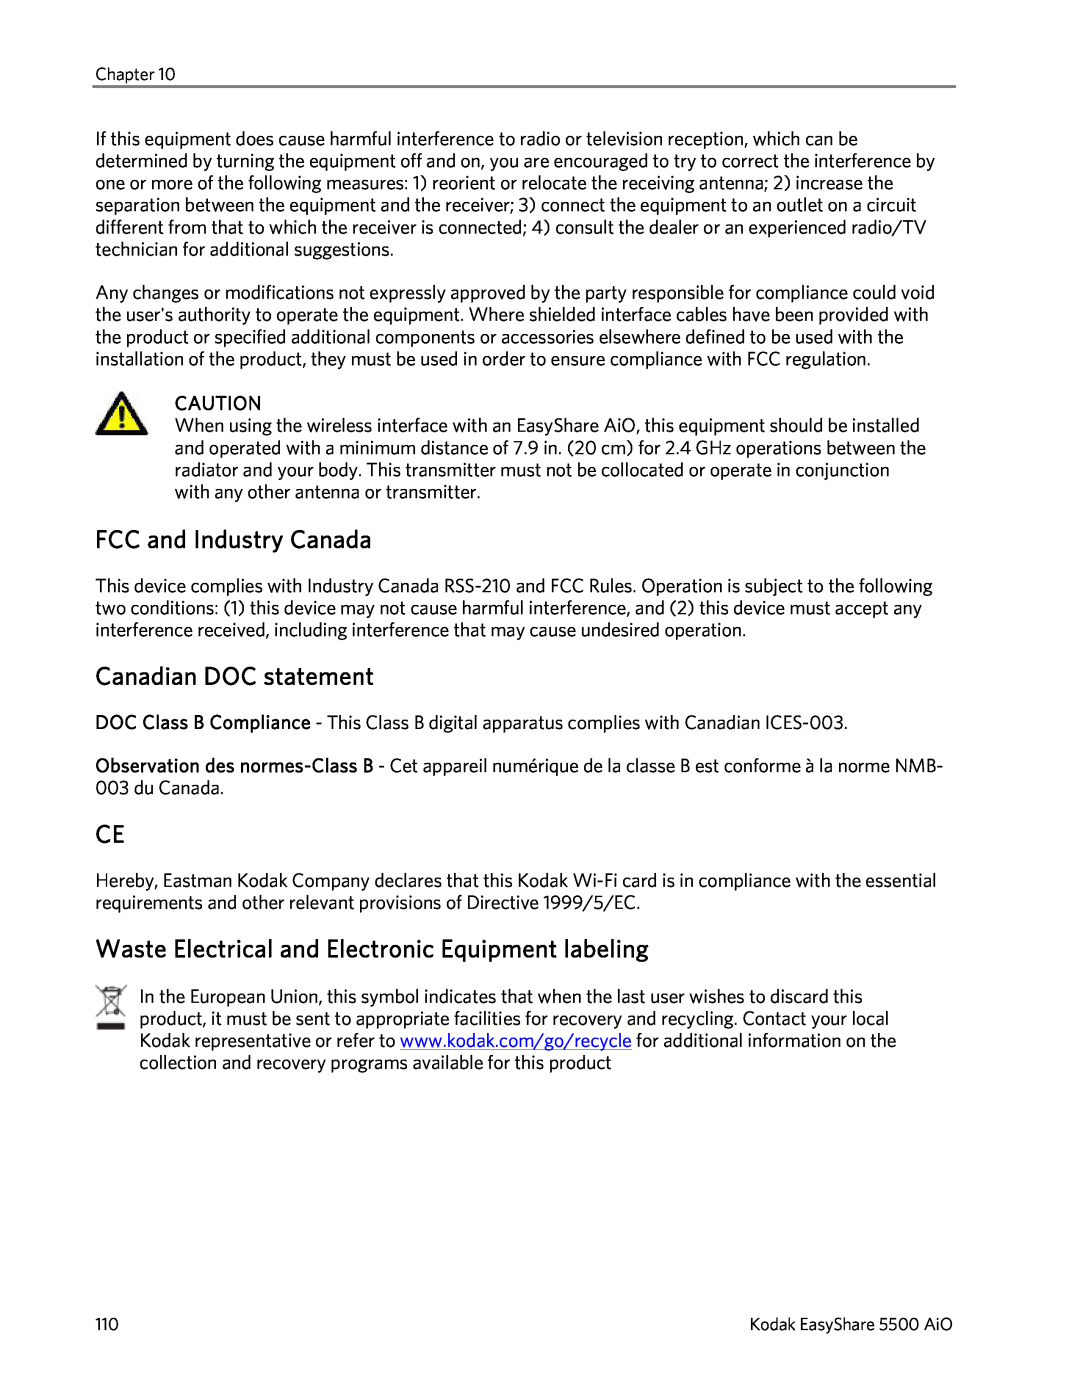 Kodak 5500 manual FCC and Industry Canada, Canadian DOC statement, Chapter 